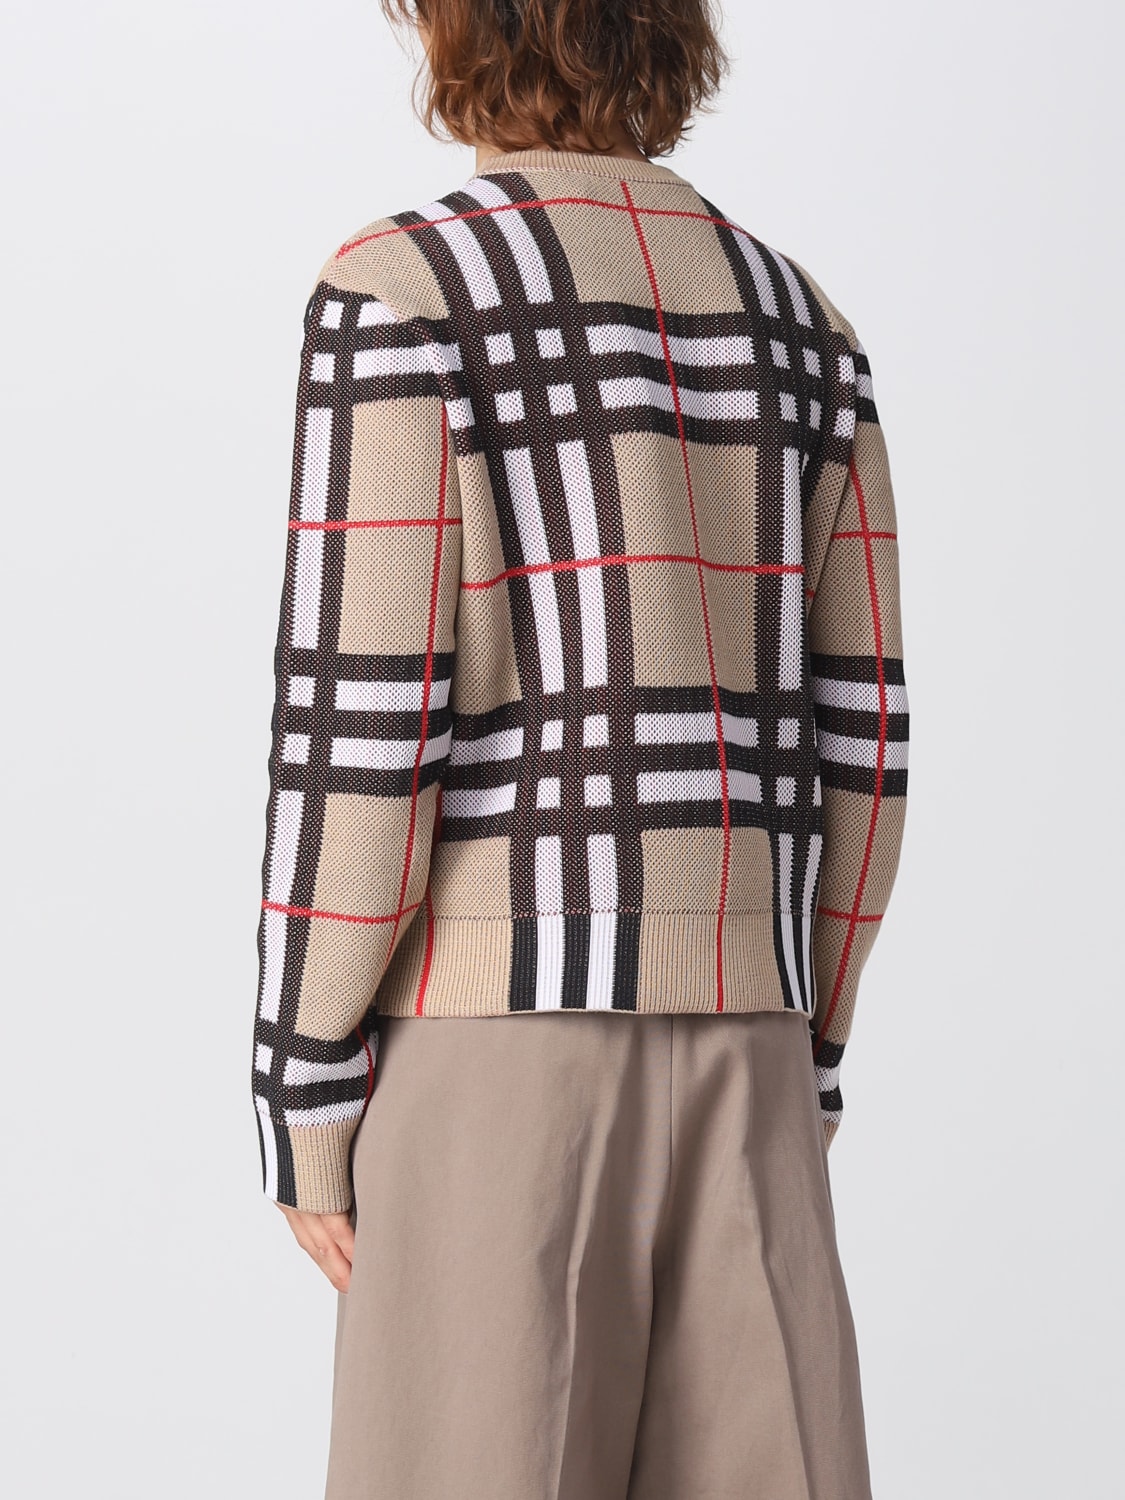 Burberry sweater in cotton blend